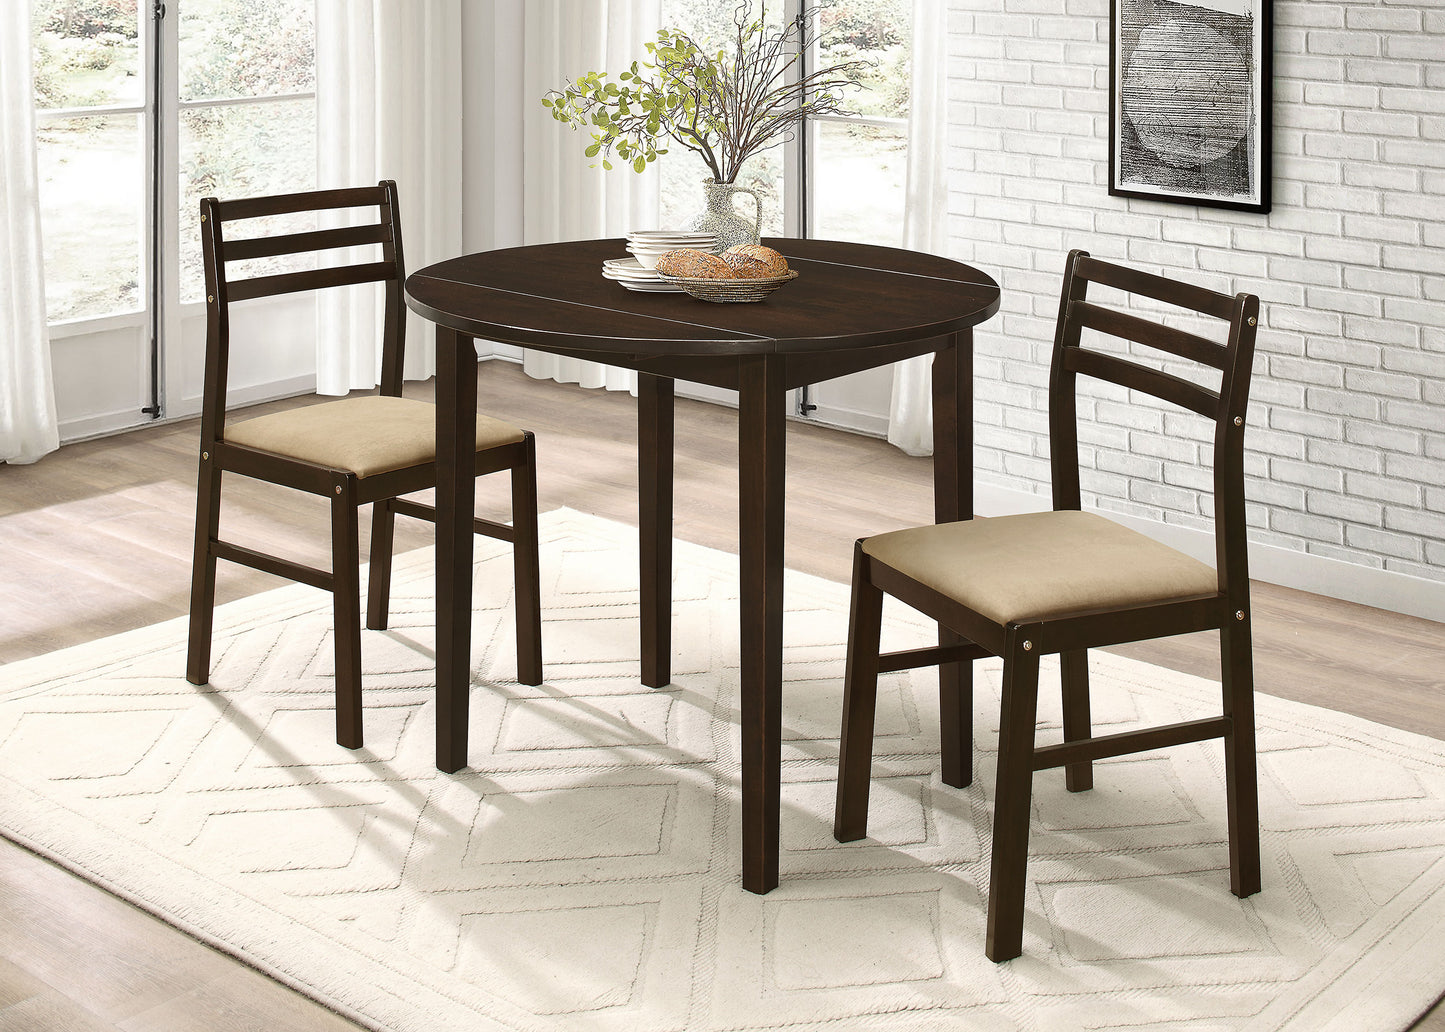 Bucknell 3-piece Dining Set with Drop Leaf Cappuccino and Tan